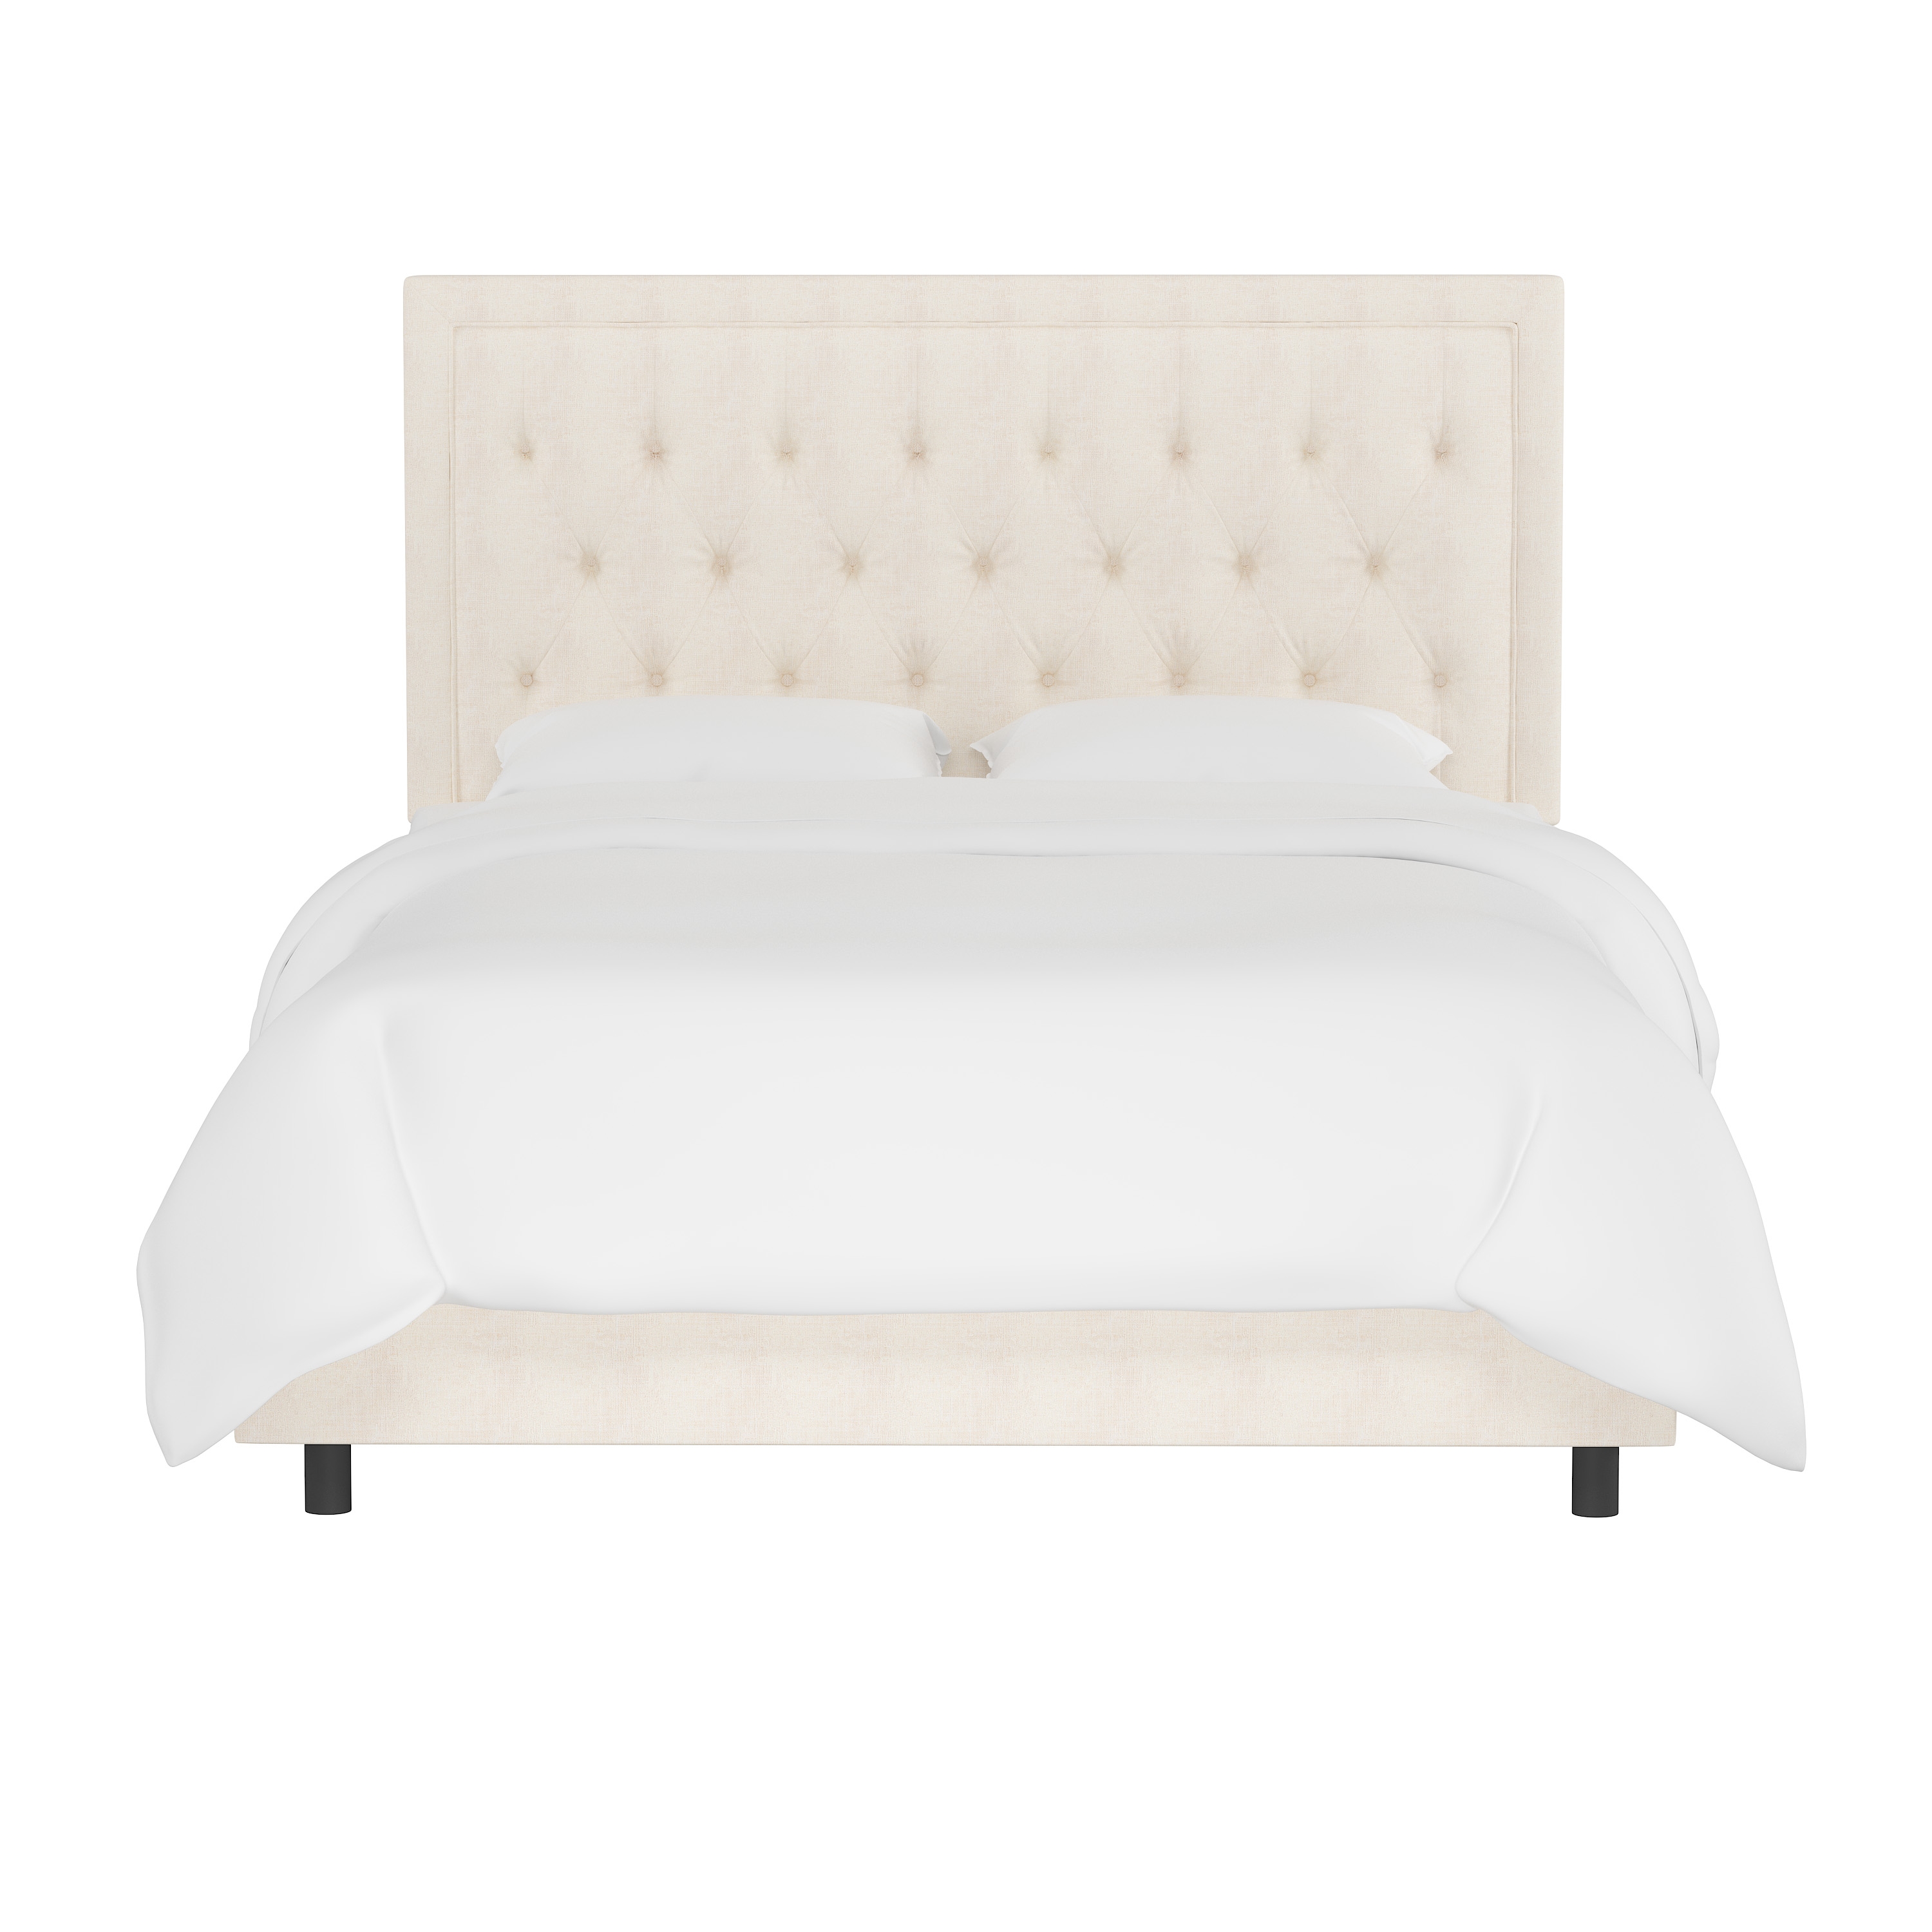 Lafayette Bed, Twin, White - Image 1